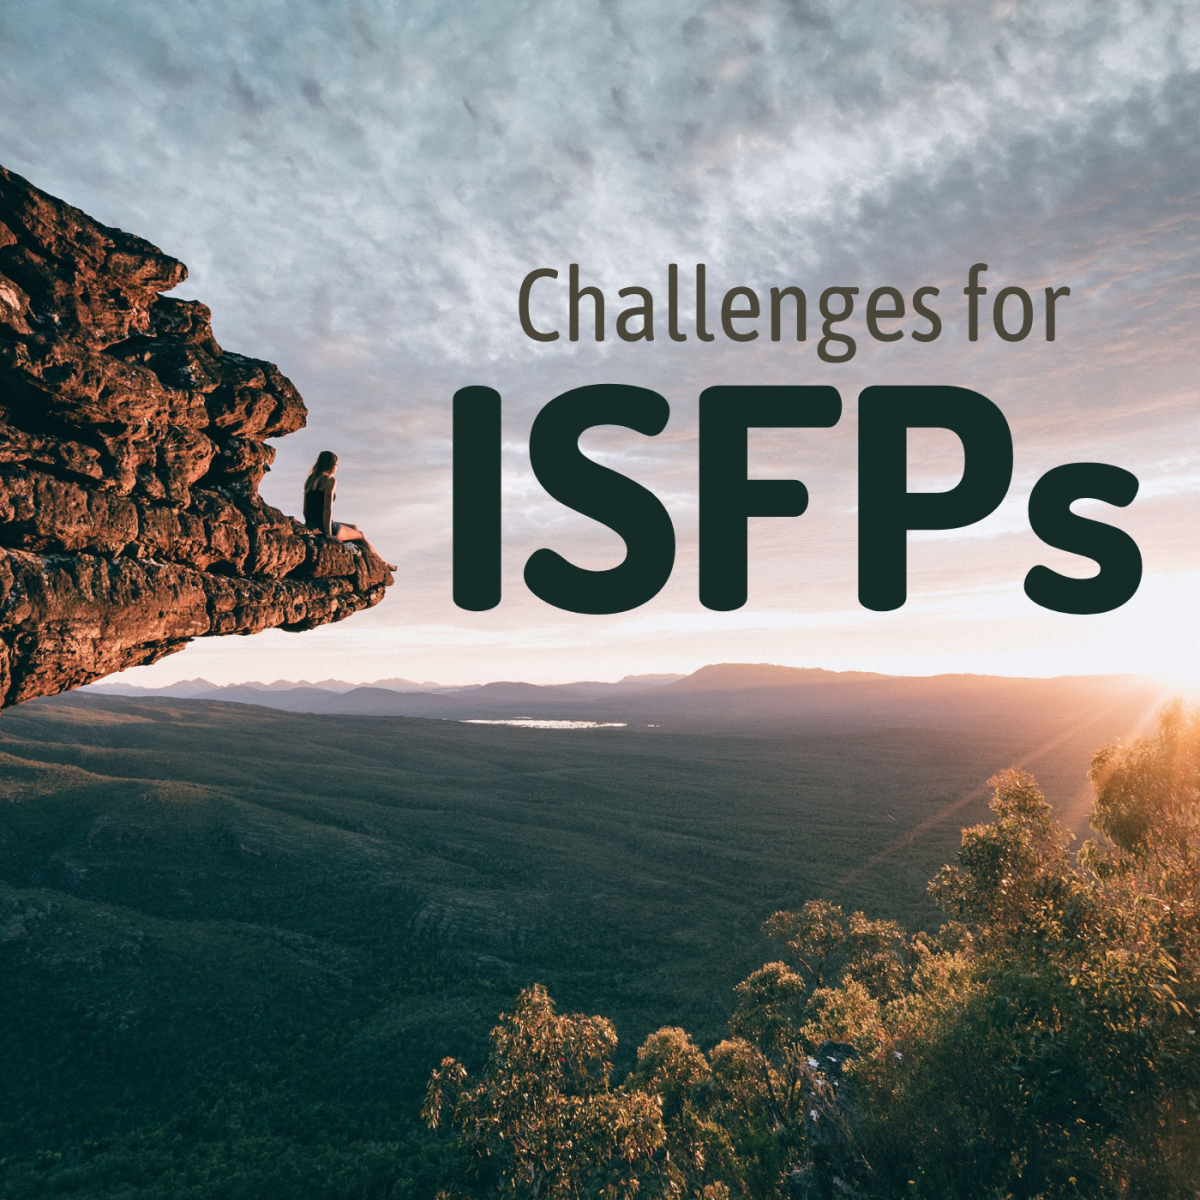 ISFPs tend to be nature lovers with deep wells of emotion inside of them. Learn more about this personality type and the struggles they tend to face.